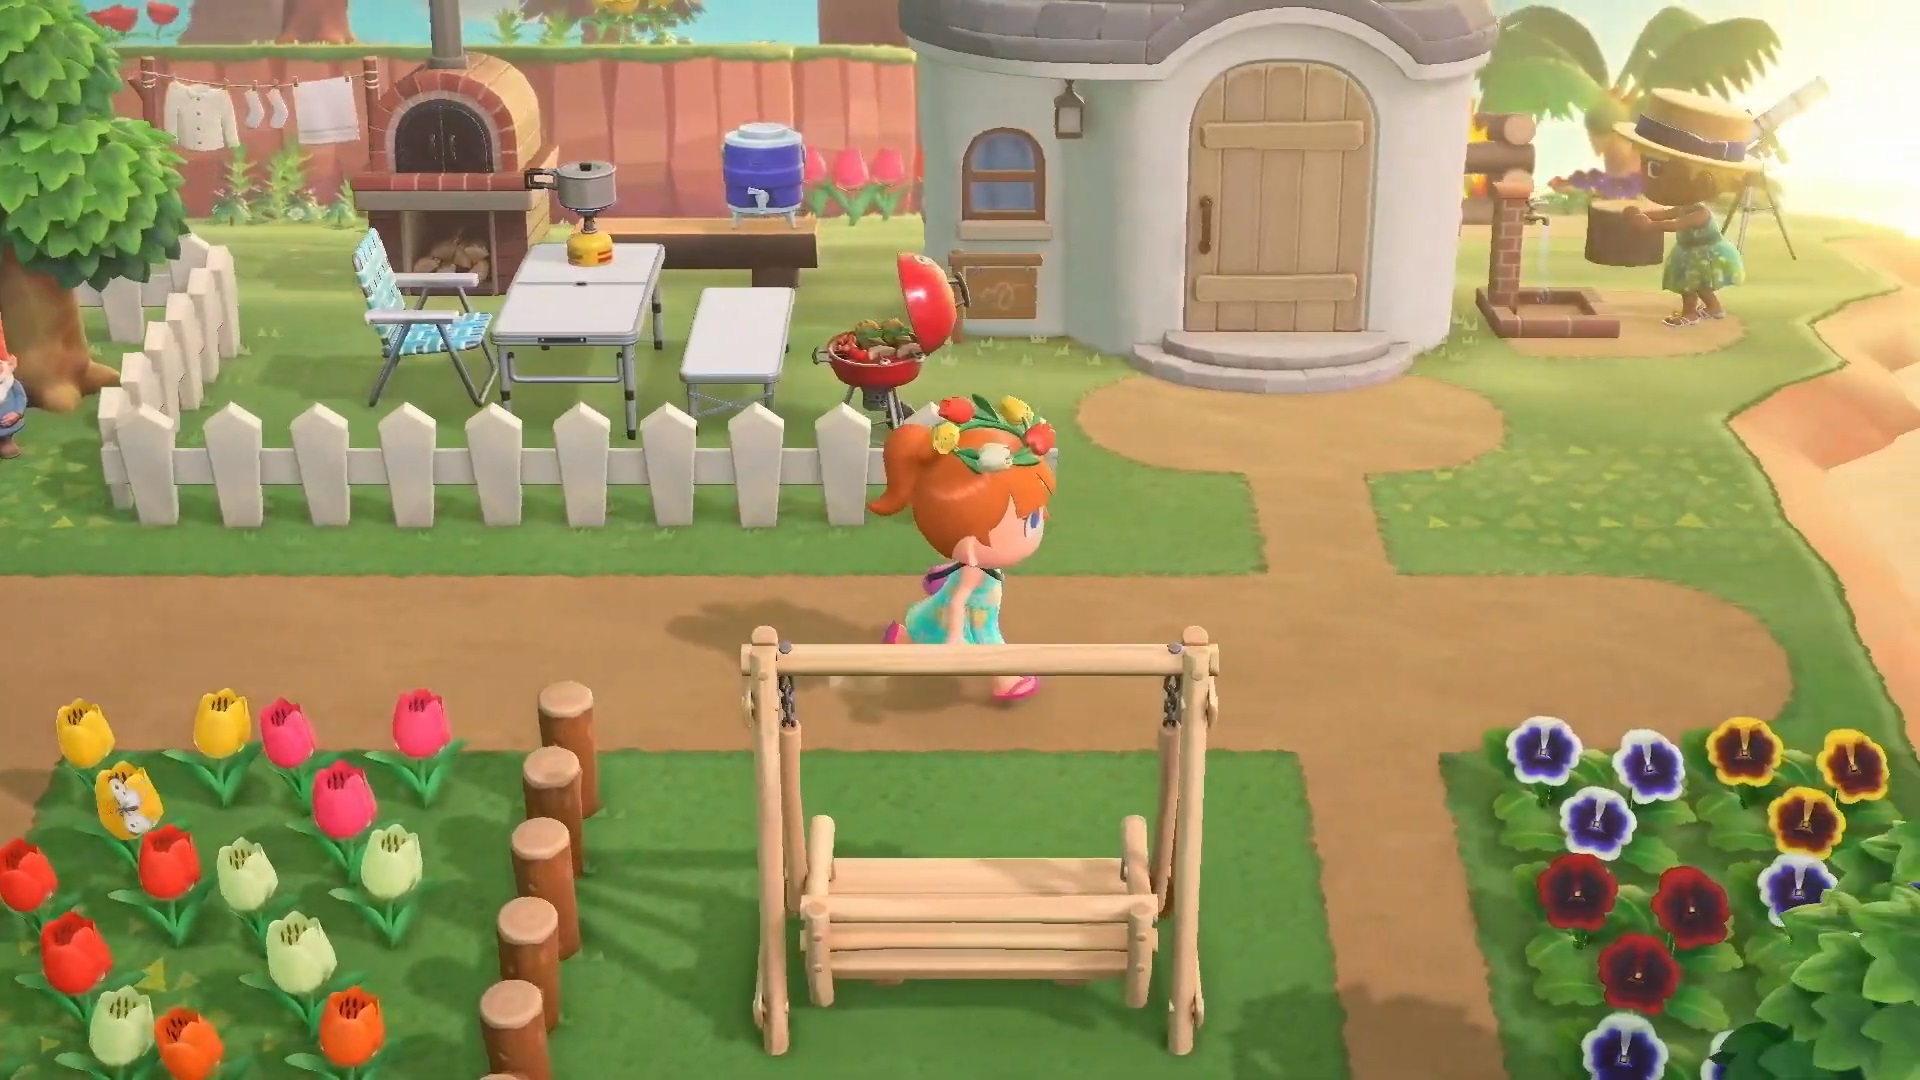 Running down a path by a house in Animal Crossing New Horizons.